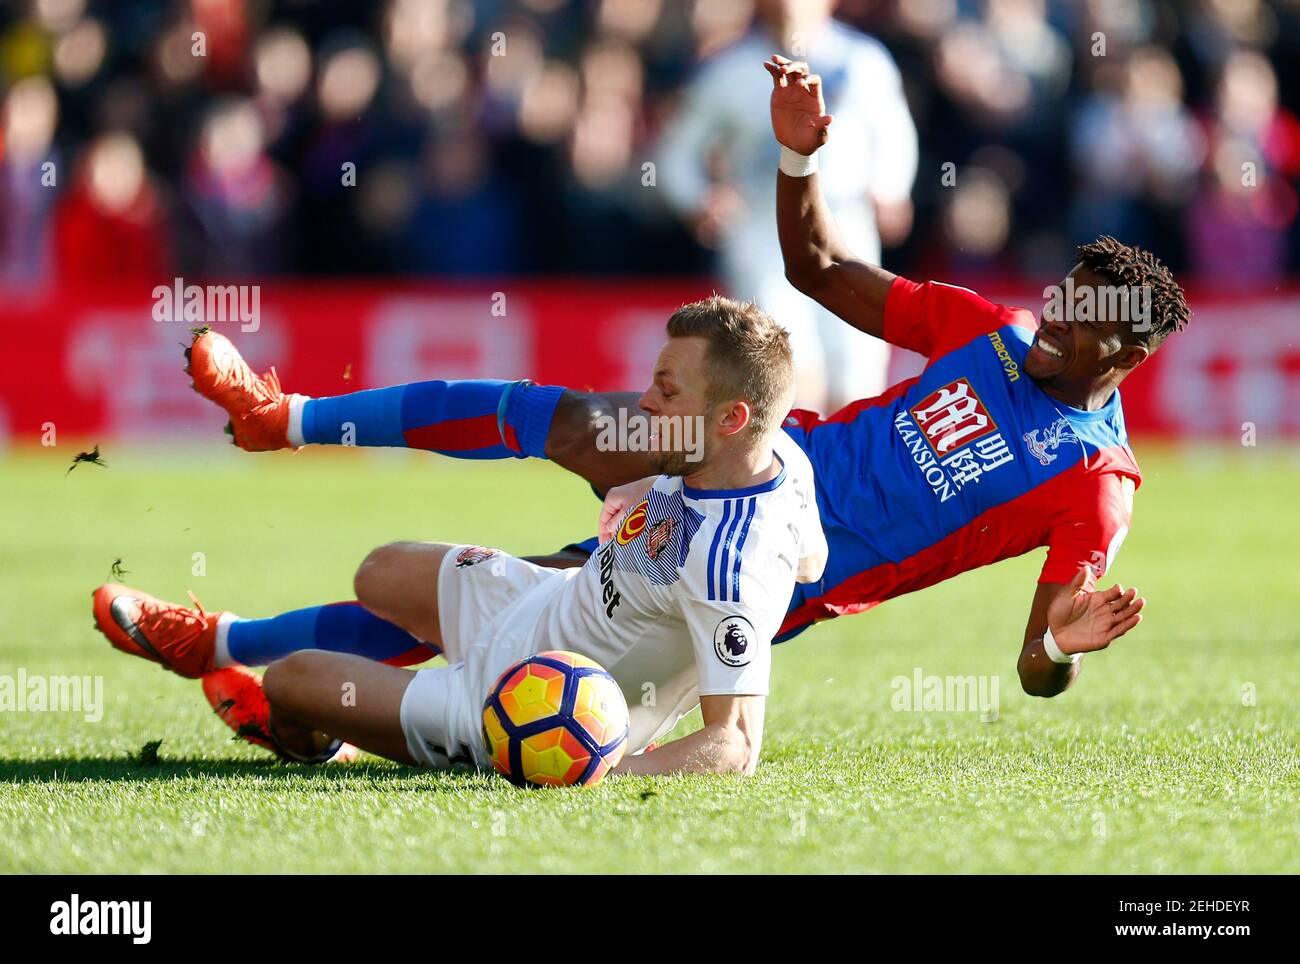 Britain Football Soccer - Crystal Palace v Sunderland - Premier League - Selhurst Park - 4/2/17 Sunderland's Sebastian Larsson fouls Crystal Palace's Wilfried Zaha to earn a booking Reuters / Andrew Winning Livepic EDITORIAL USE ONLY. No use with unauthorized audio, video, data, fixture lists, club/league logos or 'live' services. Online in-match use limited to 45 images, no video emulation. No use in betting, games or single club/league/player publications.  Please contact your account representative for further details. Stock Photo